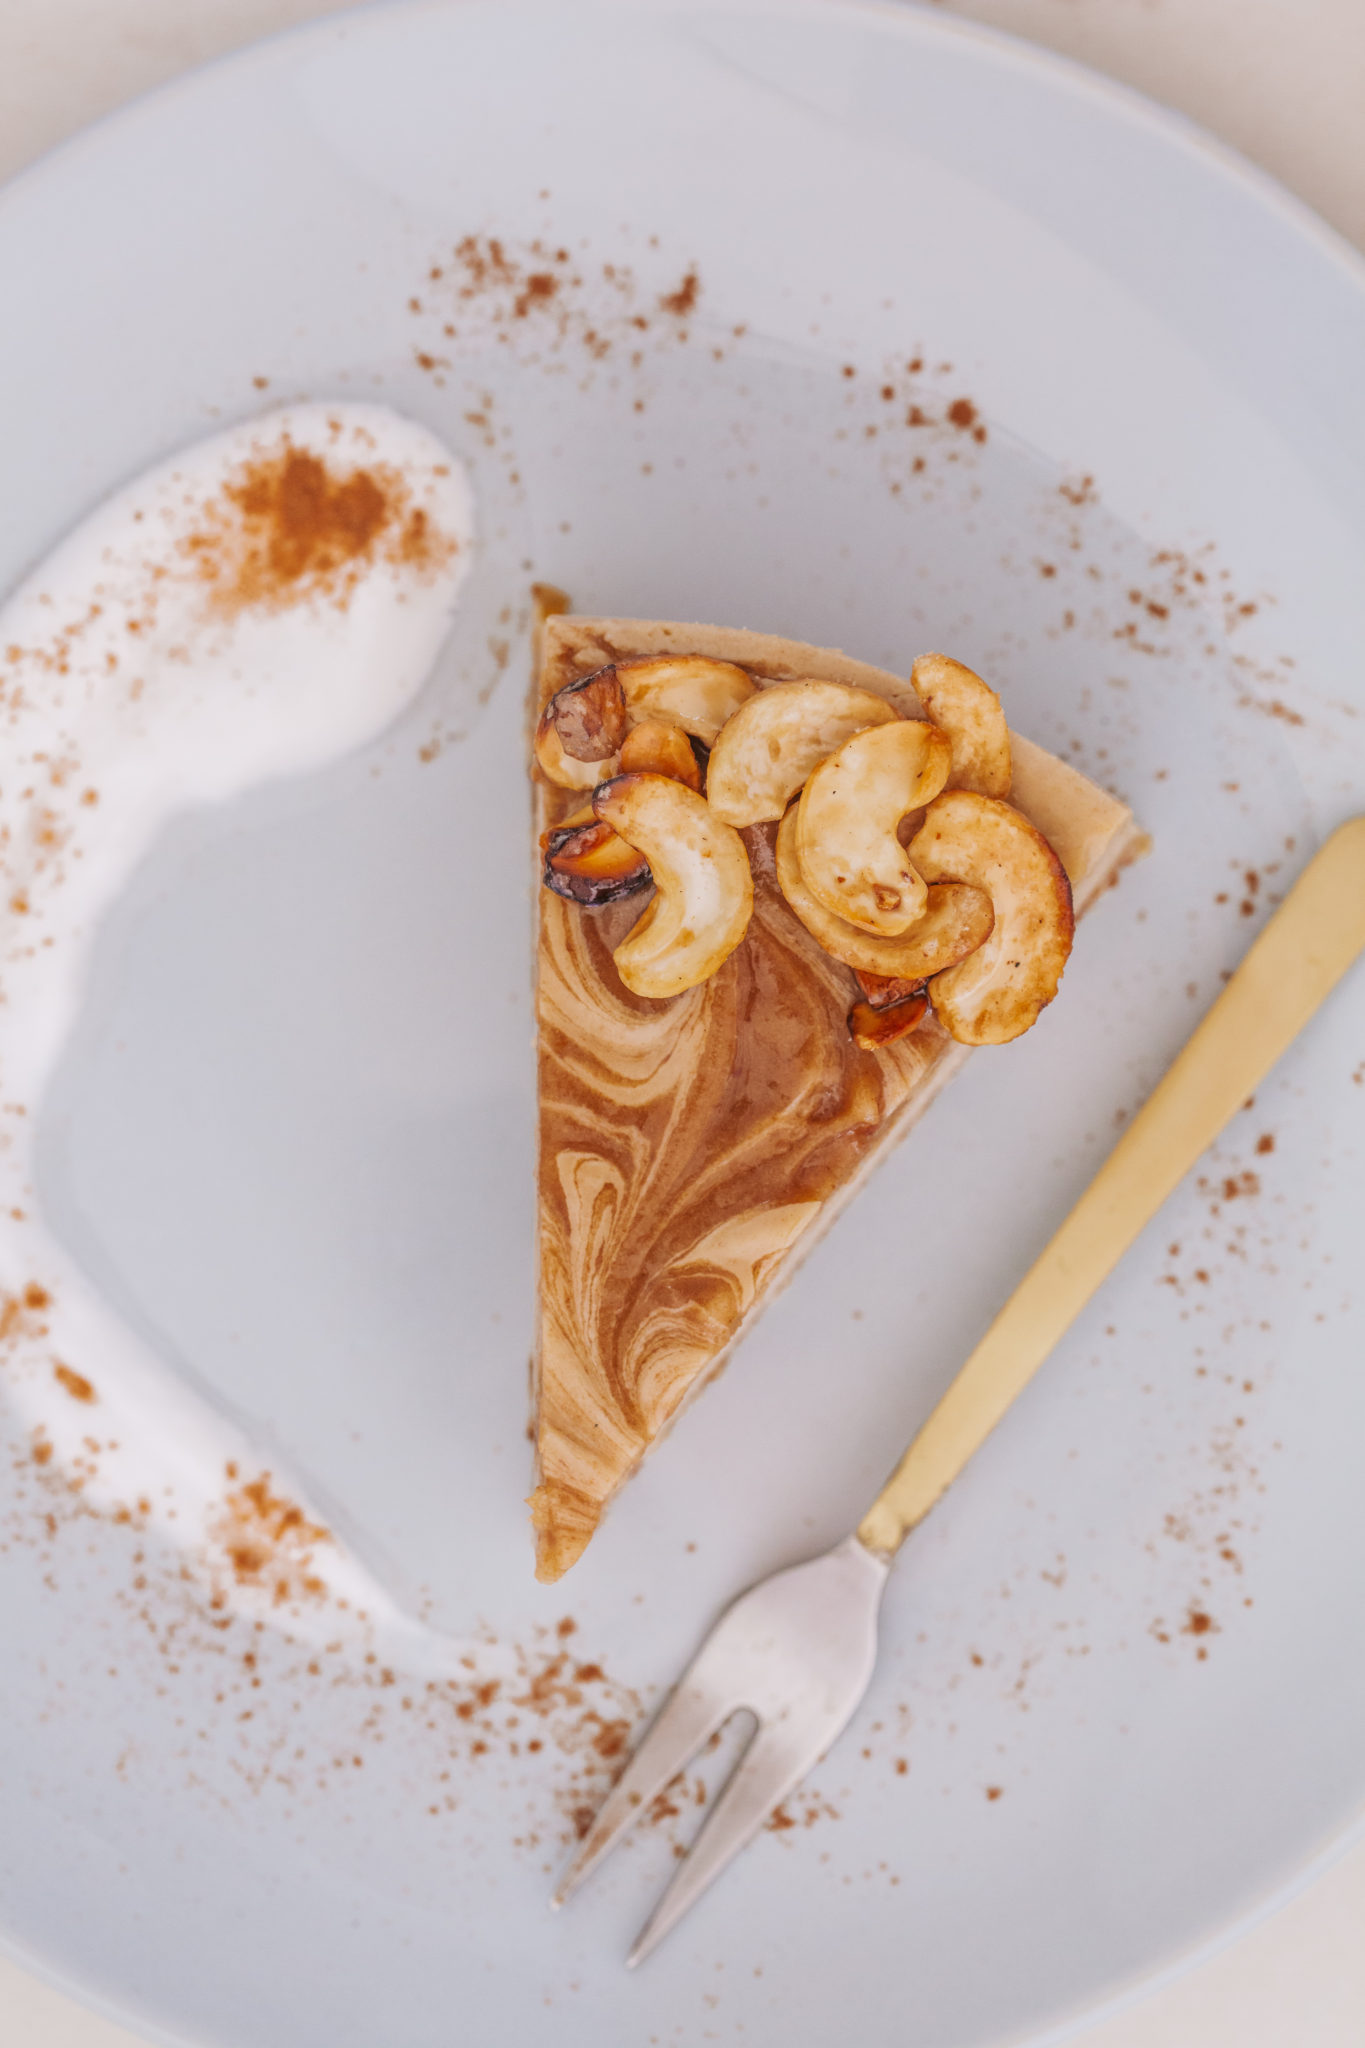 Caramel Rooibos Cheesecake on a blue plate with gold fork, coconut yoghurt swirl, and cinnamon